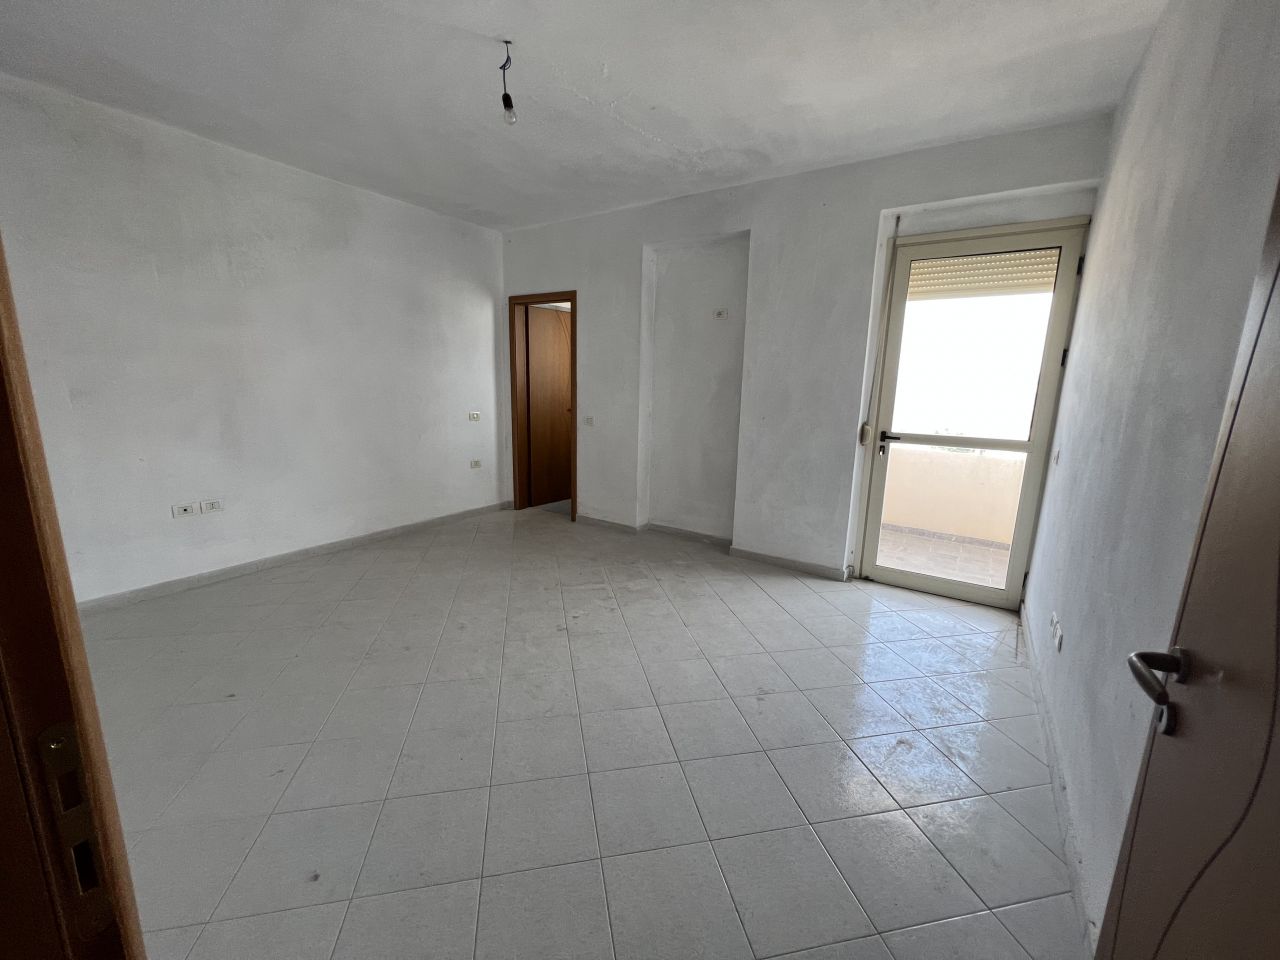 2 Bedroom Apartment In Vlore Albania For Sale In A Good Neighborhood